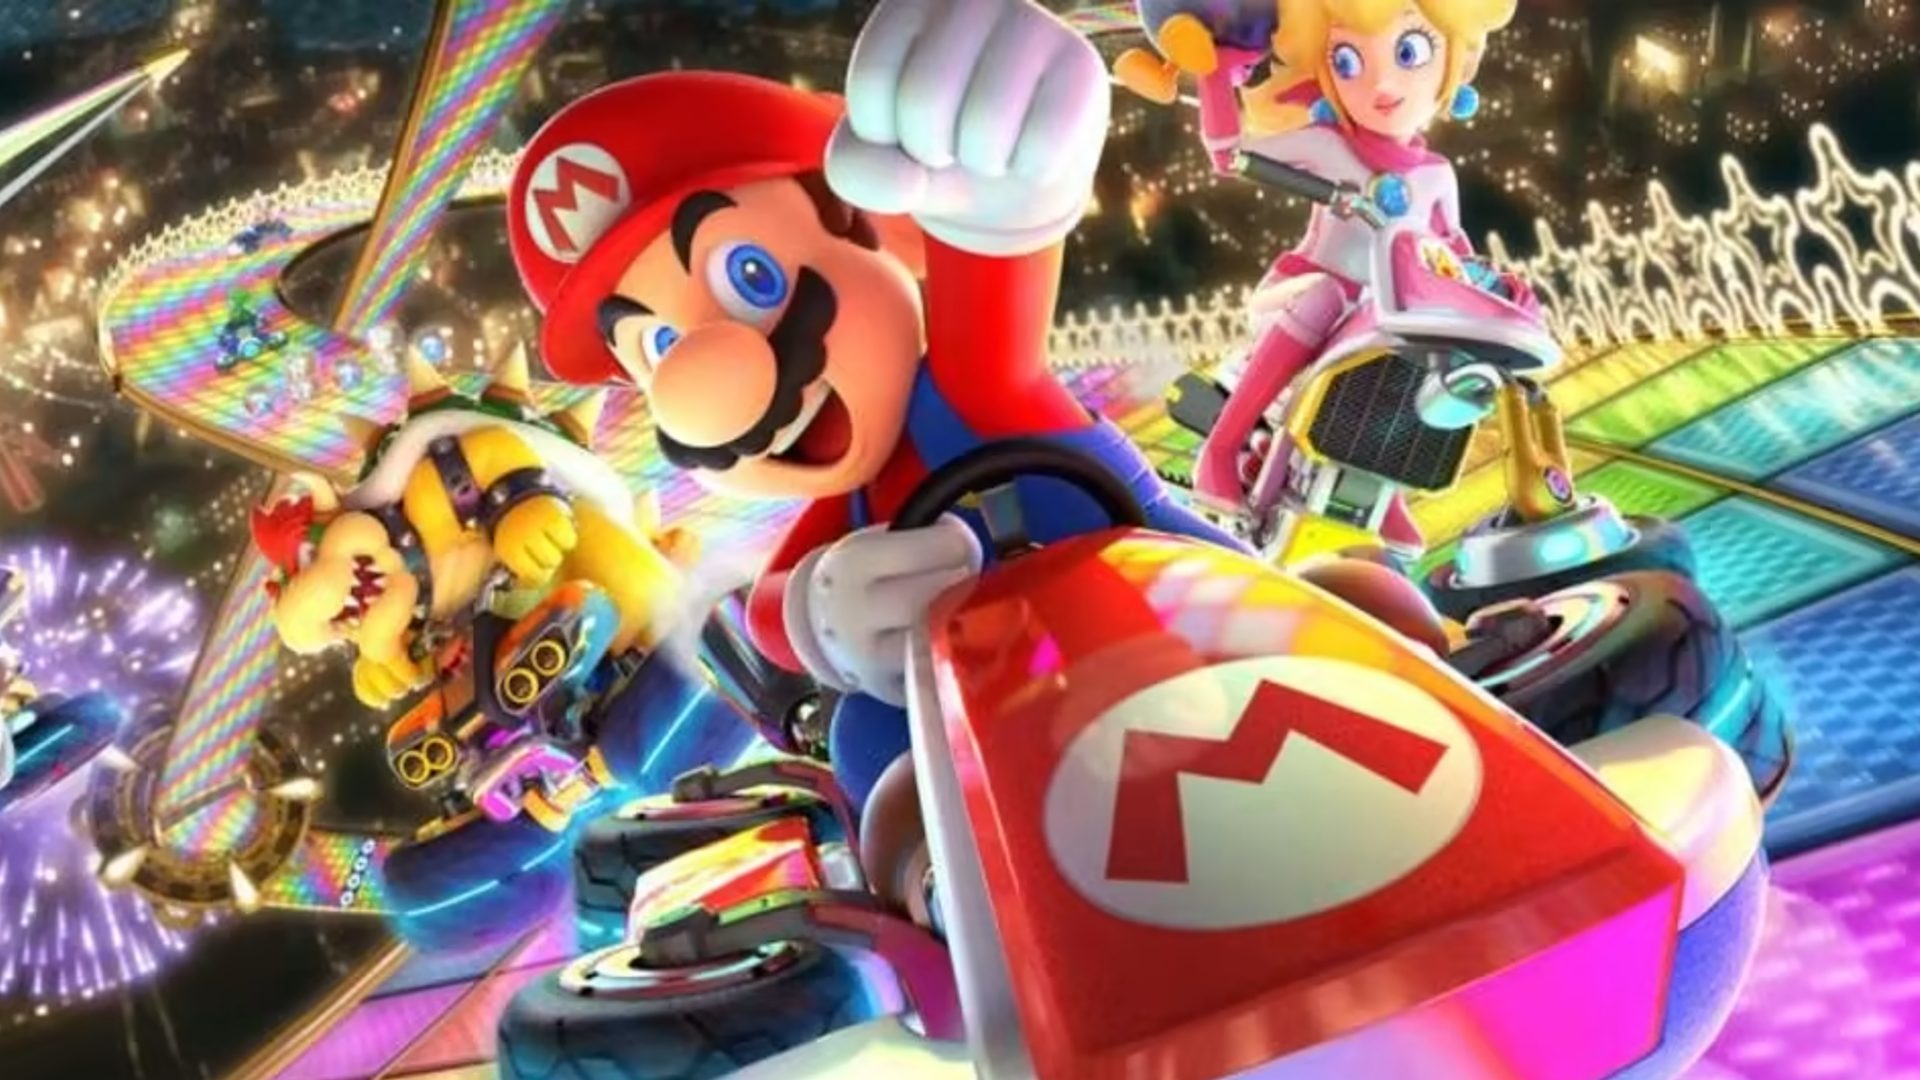 Best Multiplayer Games: Mario, Bowser, and Peach can be seen